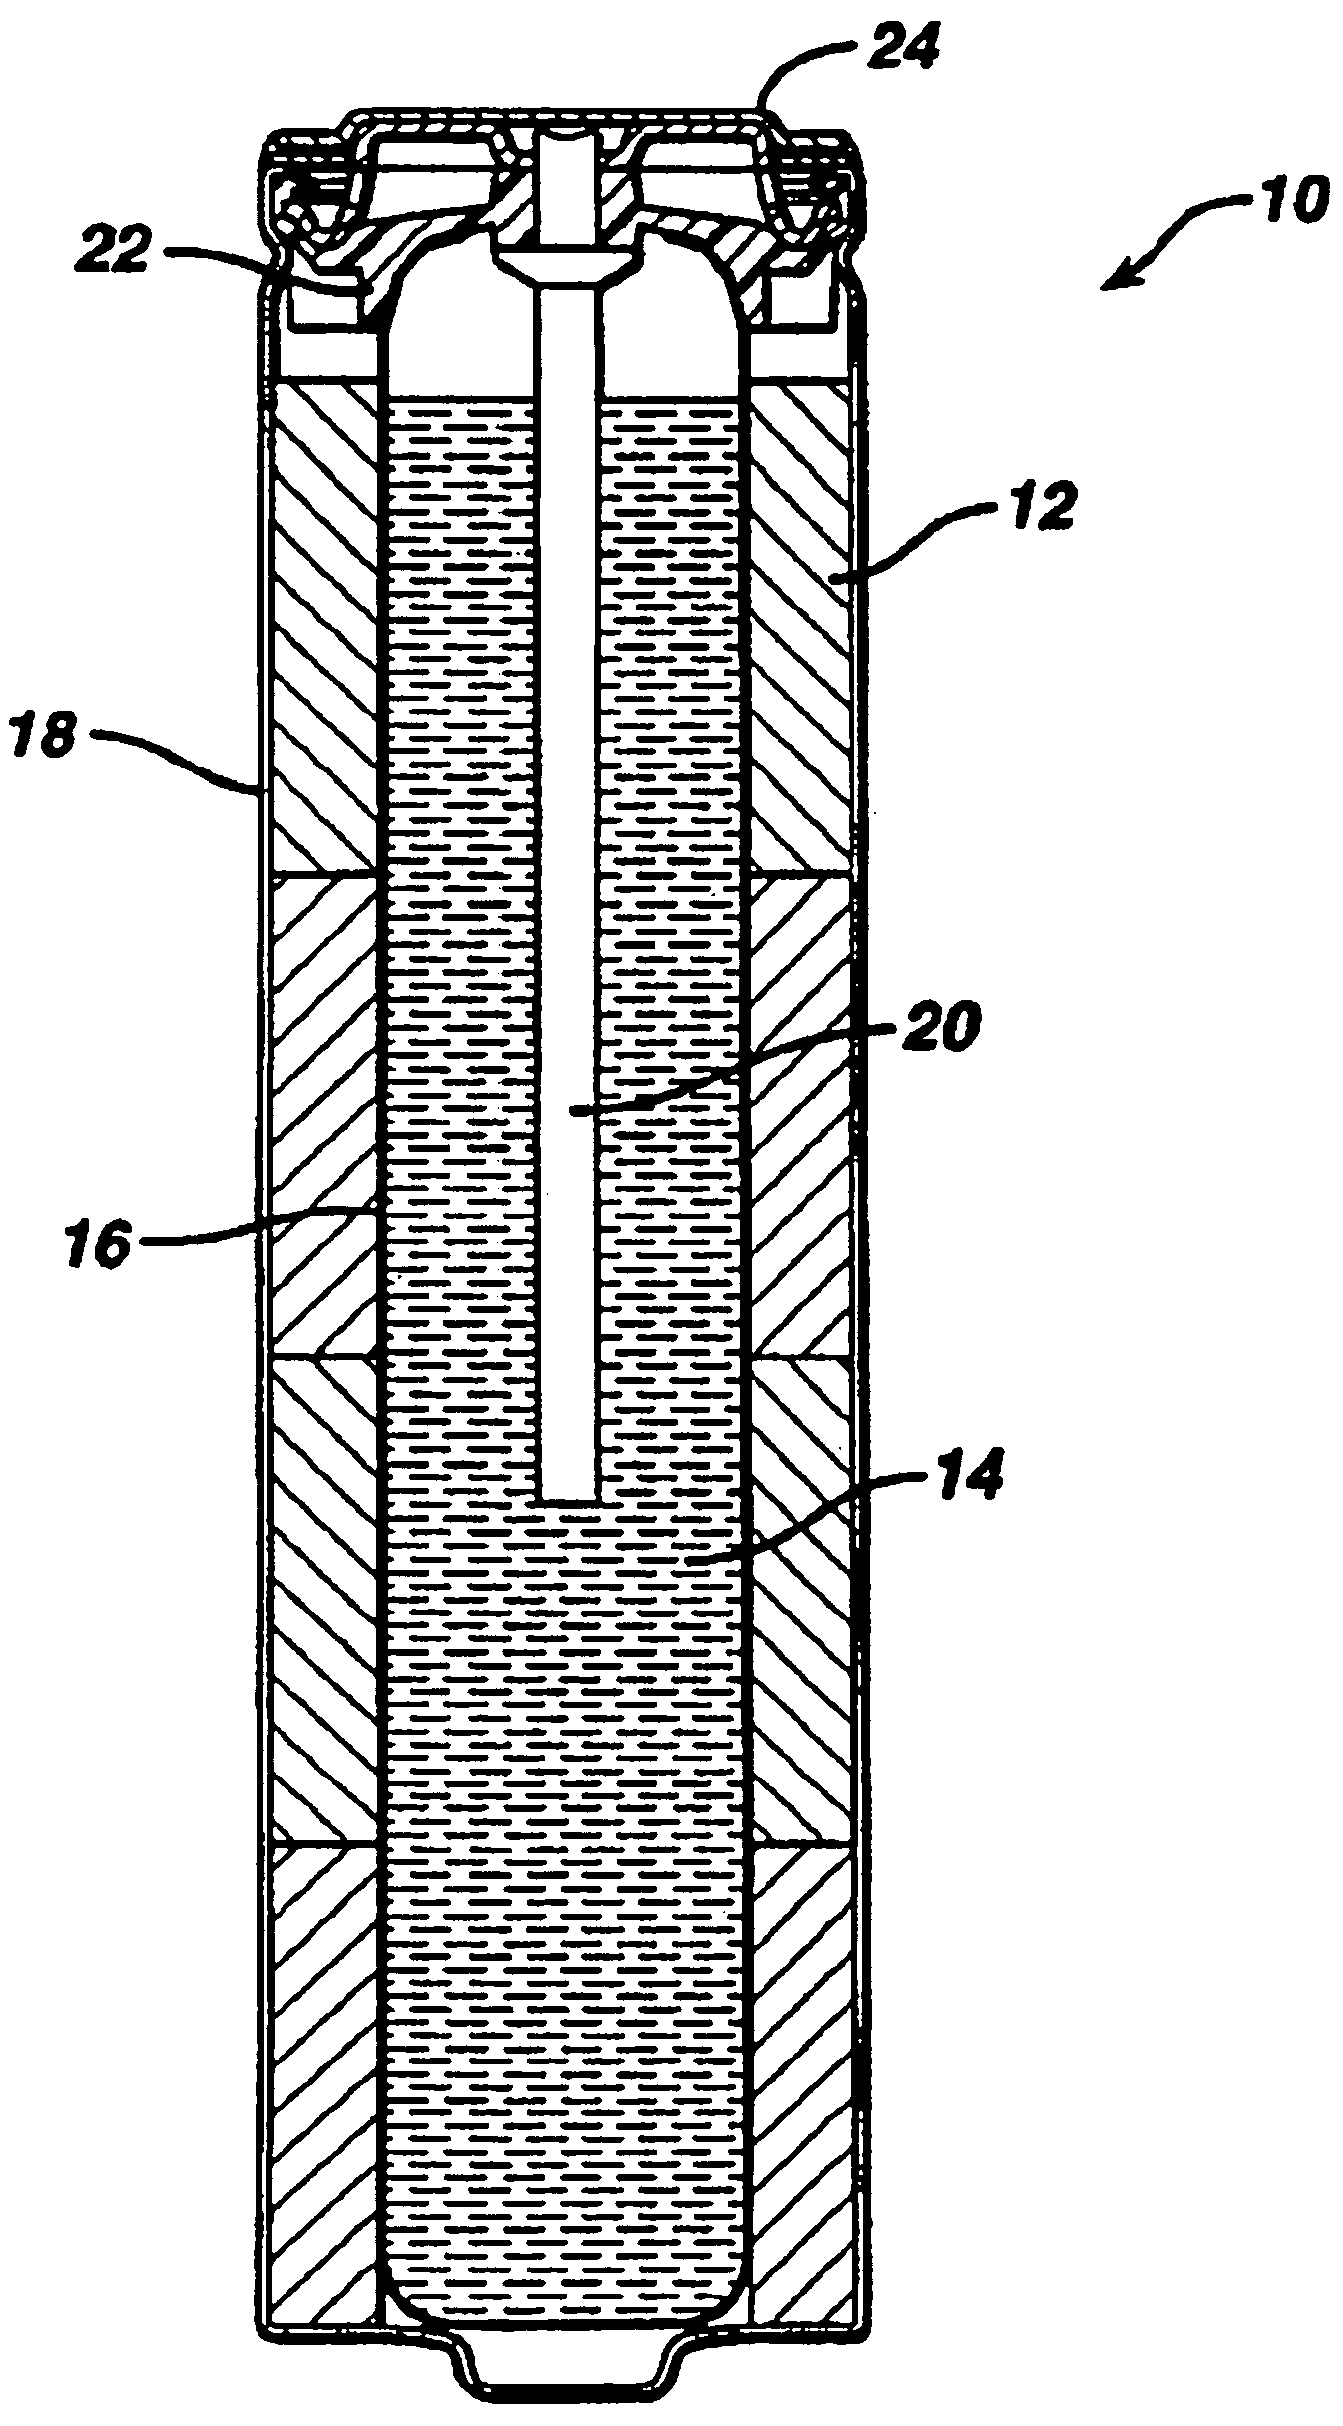 Alkaline battery including nickel oxyhydroxide cathode and zinc anode